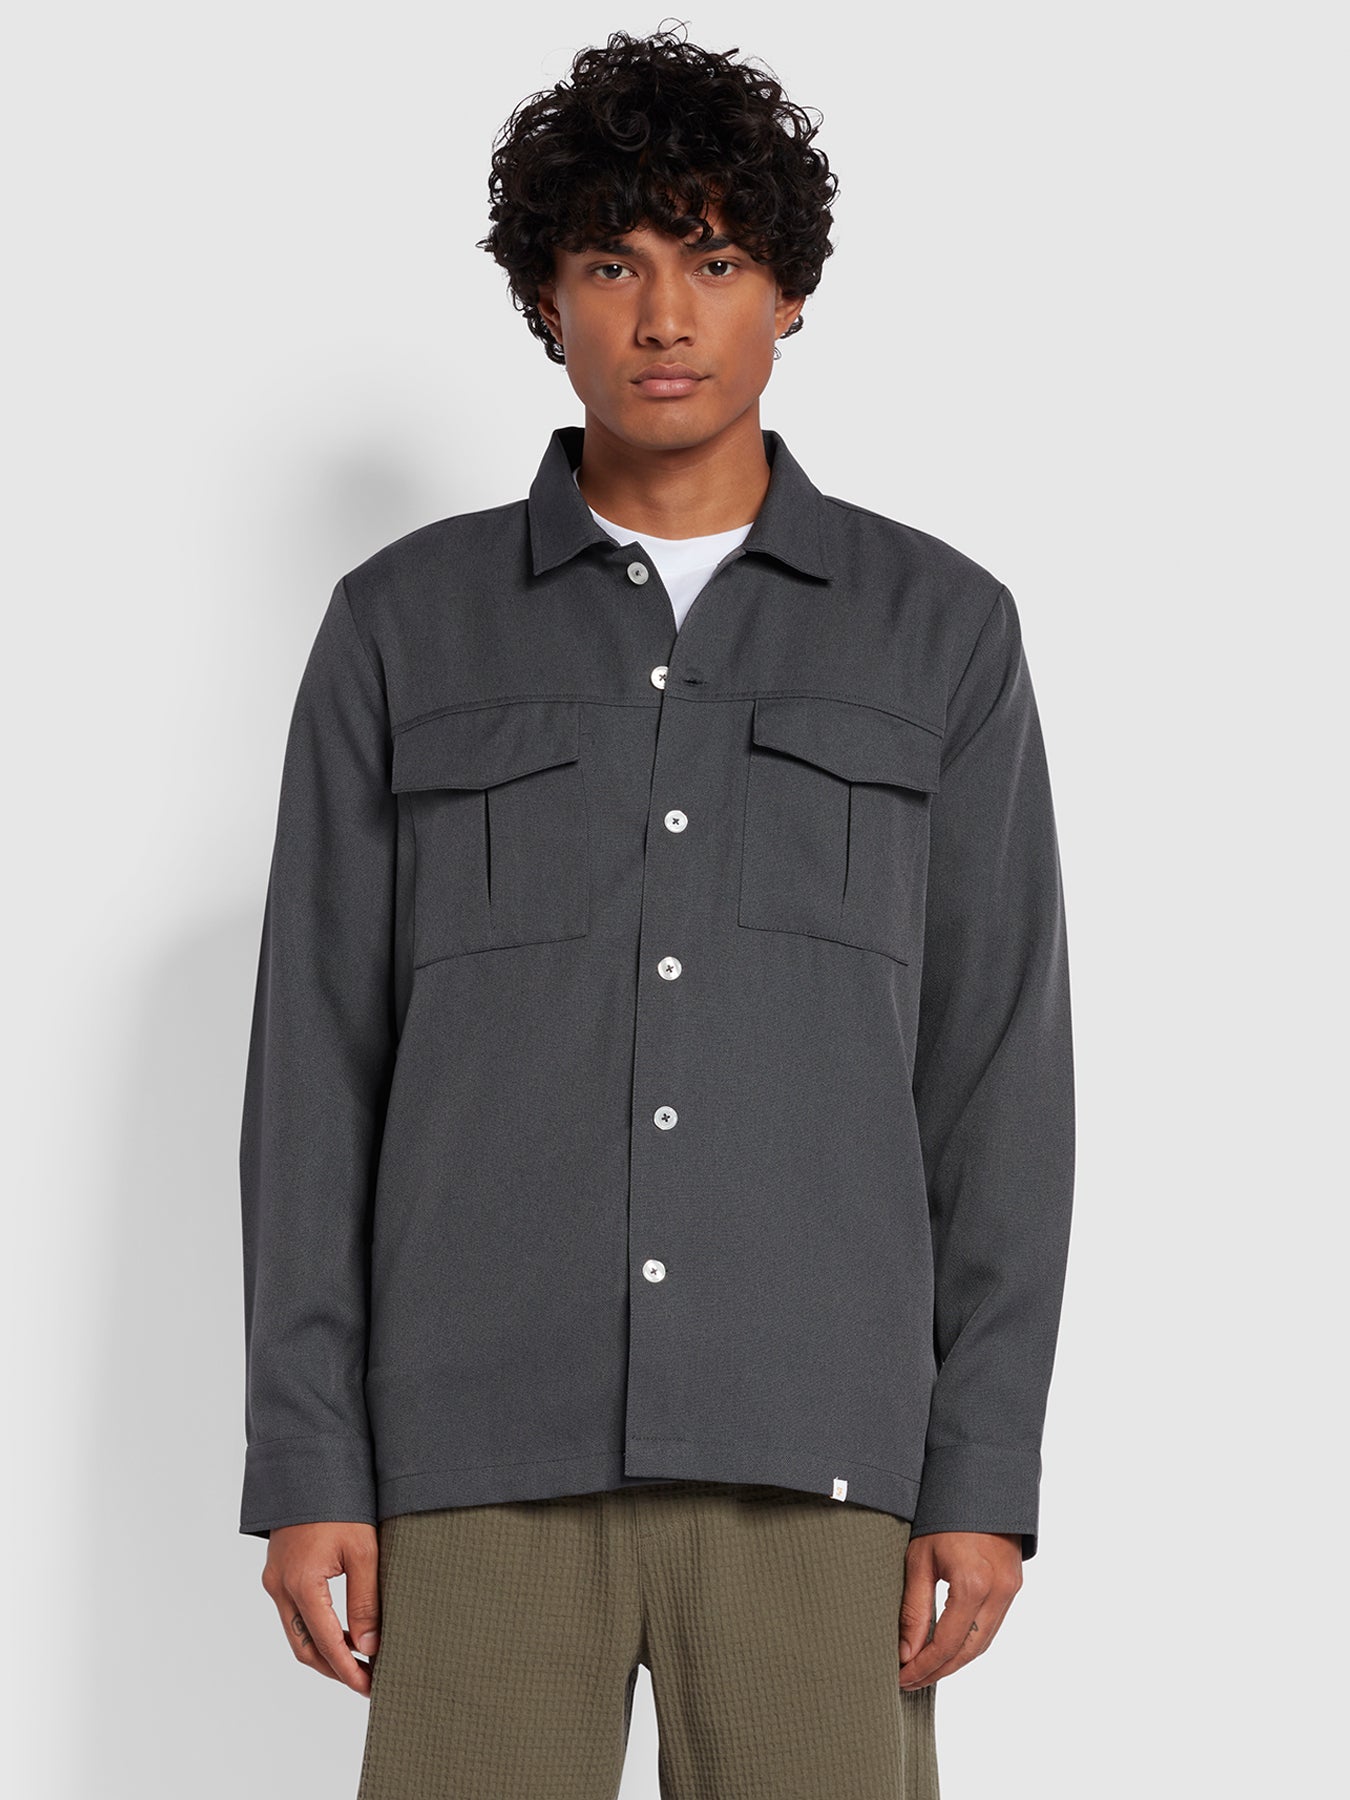 View Newport Relaxed Fit Long Sleeve Archive Overshirt In Farah Grey information